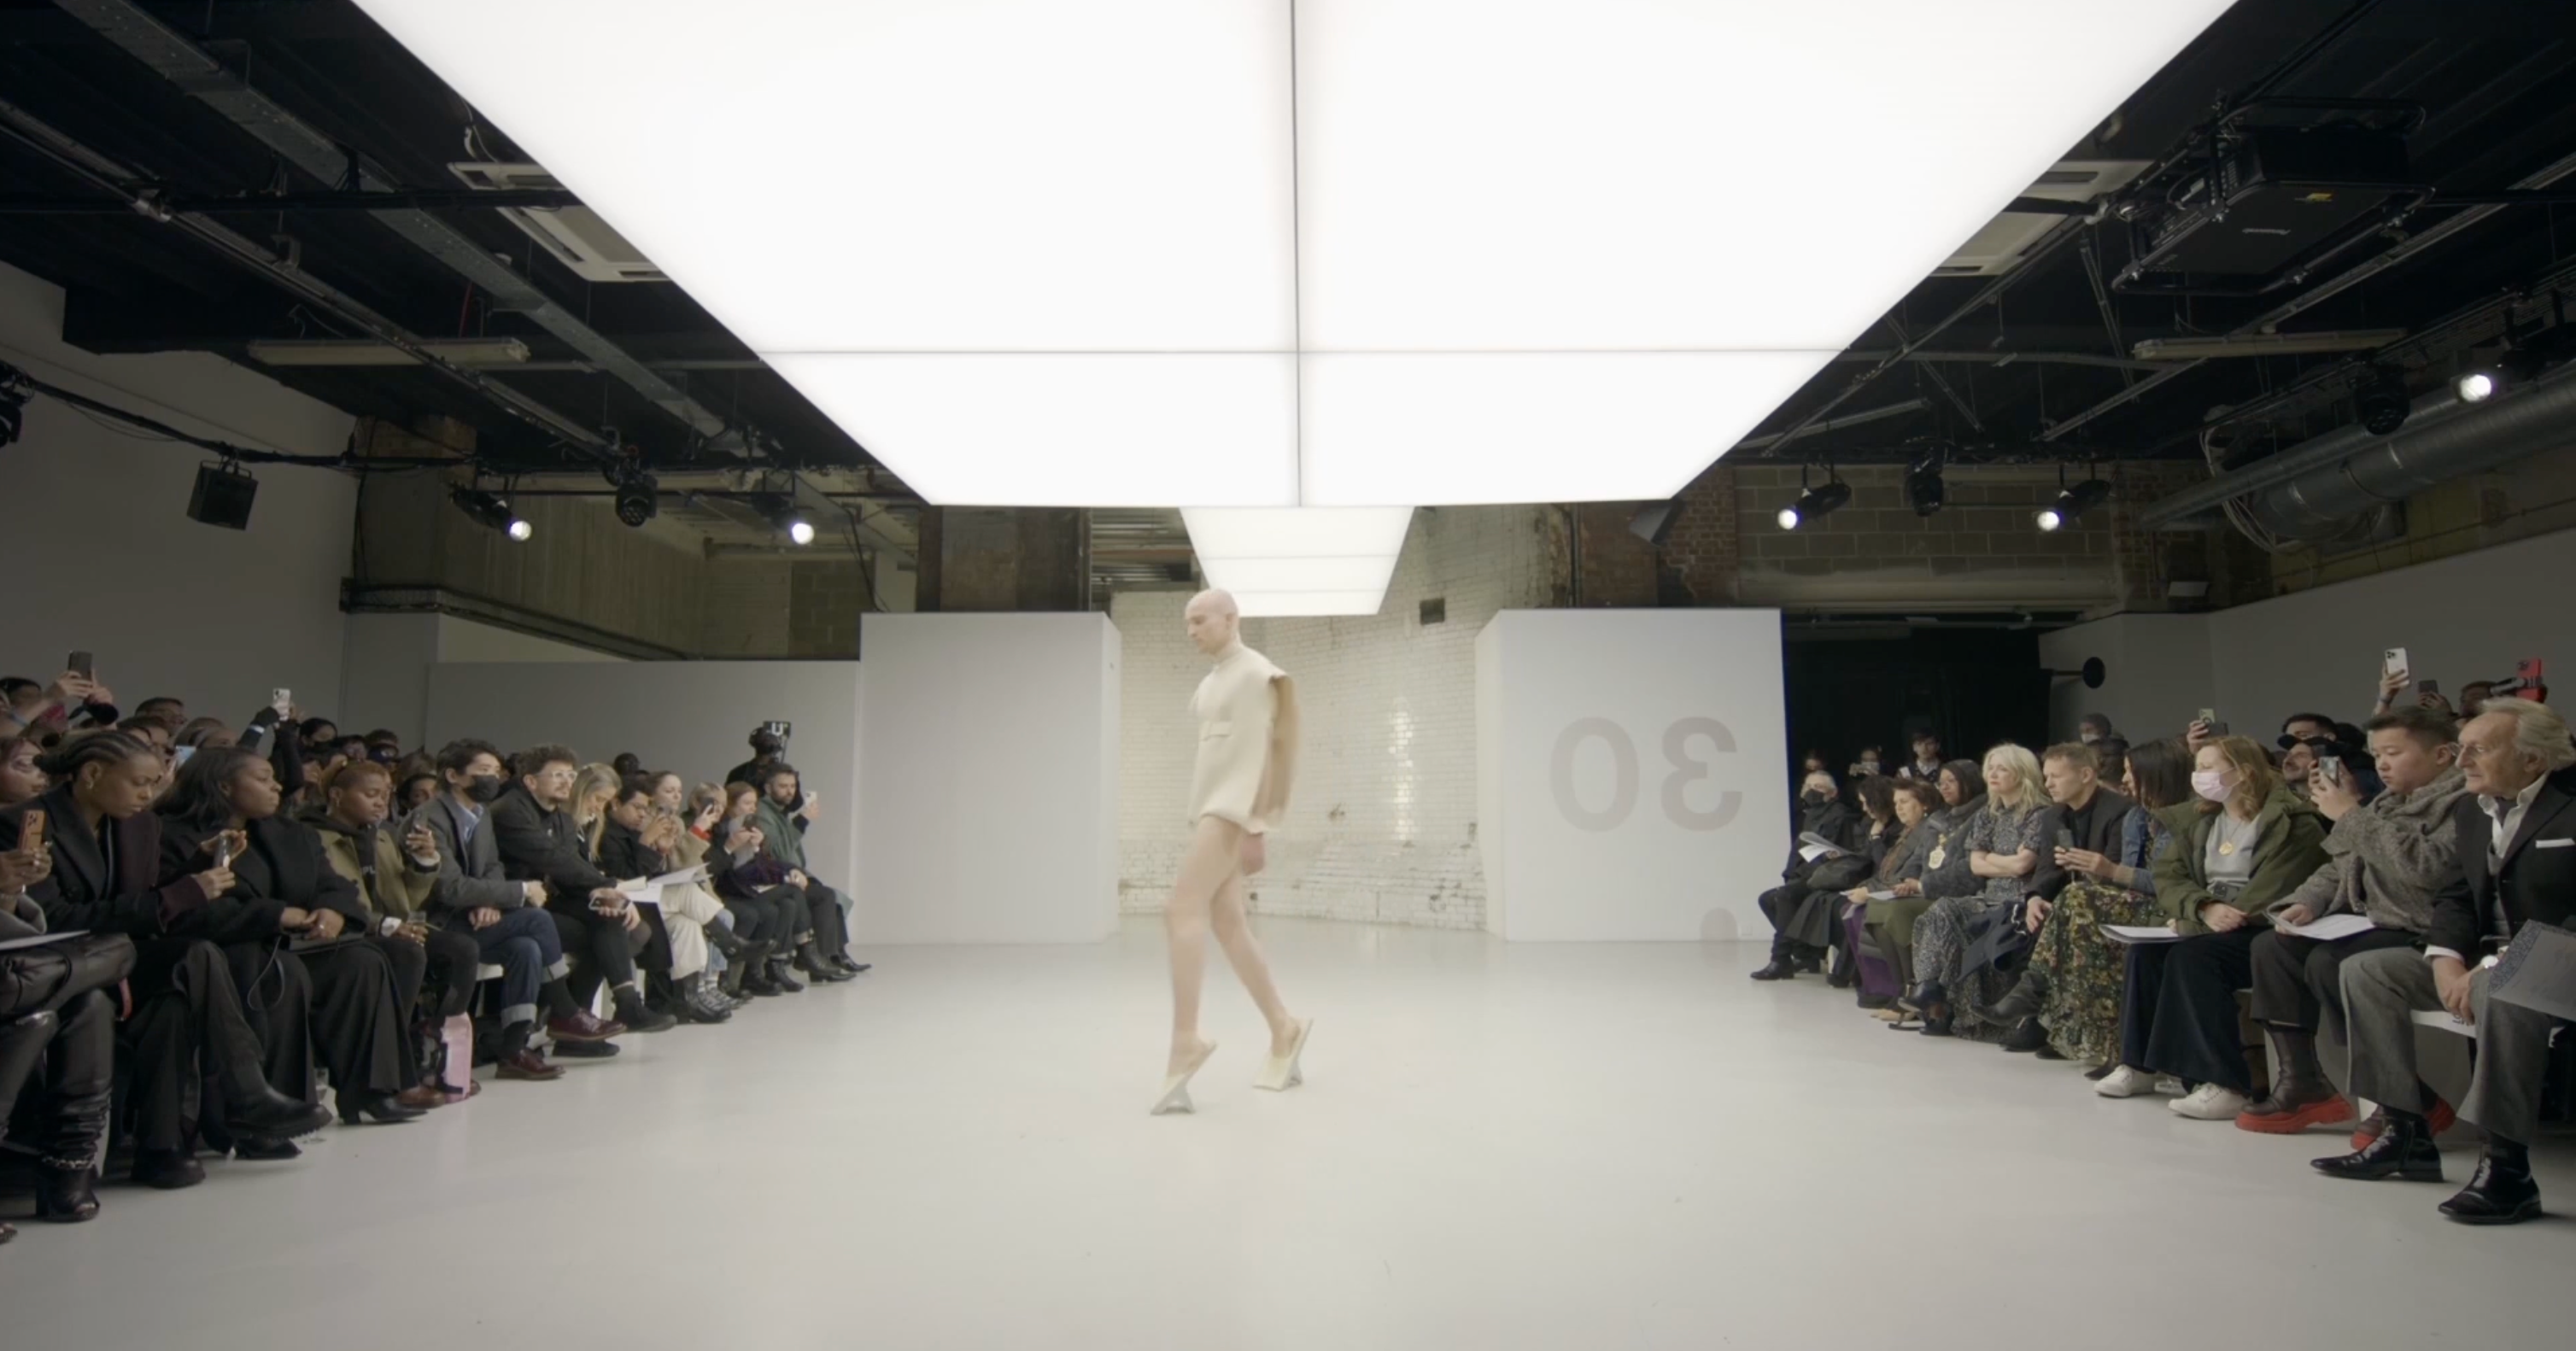 Load video: Collection designed by Dirk Vaessen, Shown at London Fashion Week 2022. This collection has gone viral worldwide. The collection shows people walking differently because of the shoes and garments they wear.